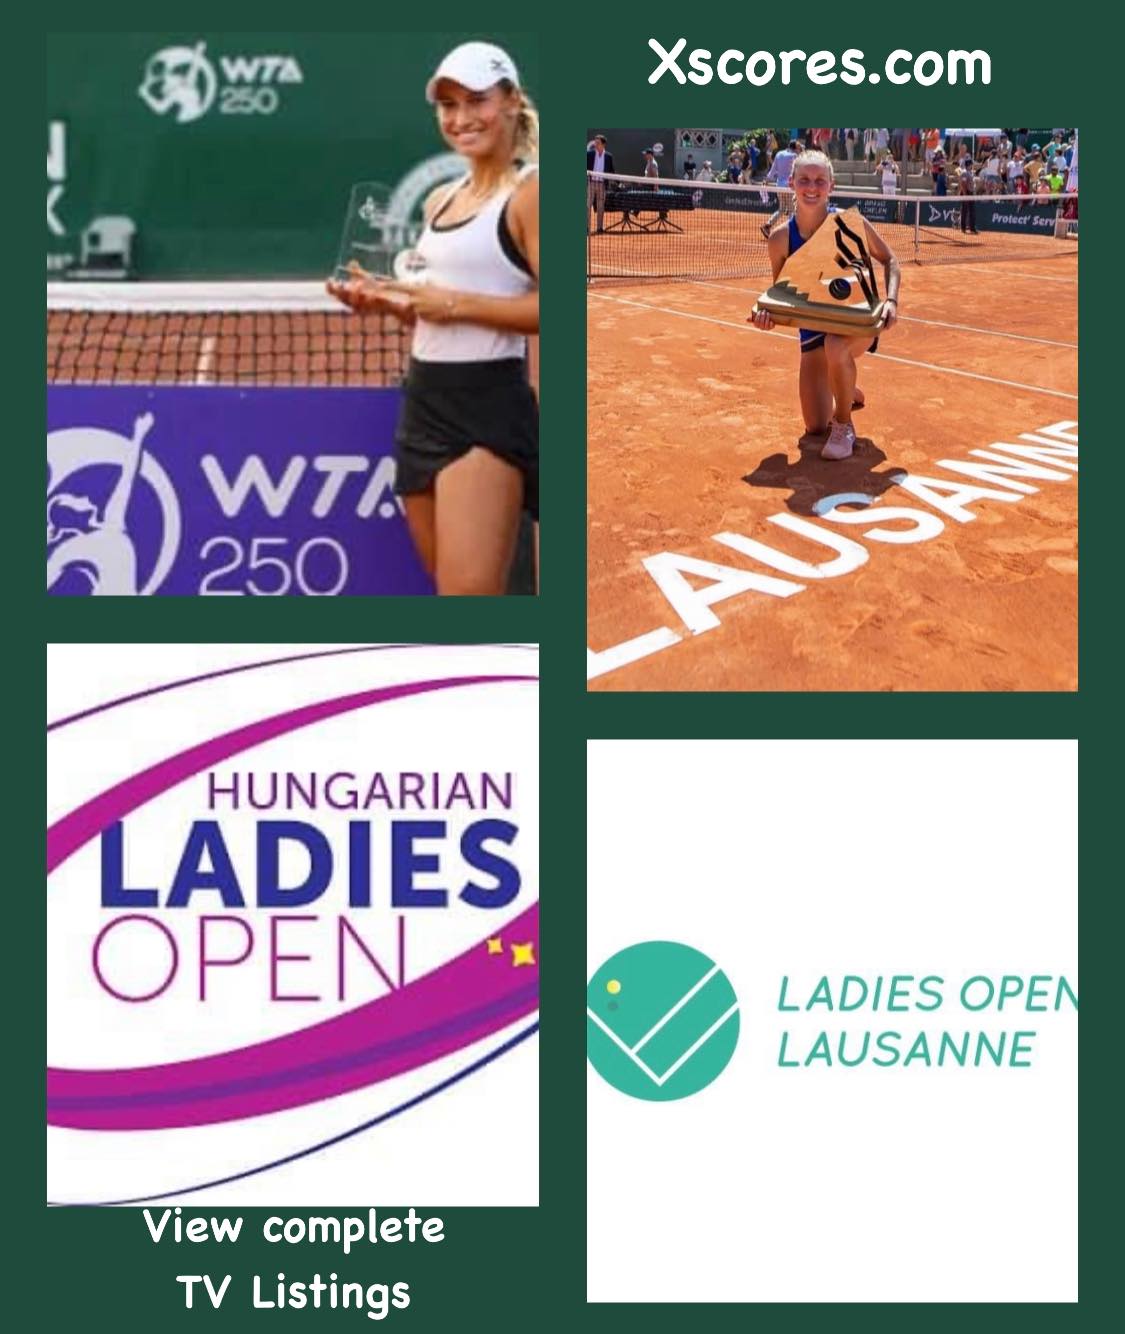 Follow next weeks Tennis fixtures, latest results & live scores from WTA 250 LAUSANNE OPEN 2022 and WTA BUDAPEST OPEN 2022. TV Listings from 11th until 17th July 2022. - Xscores News